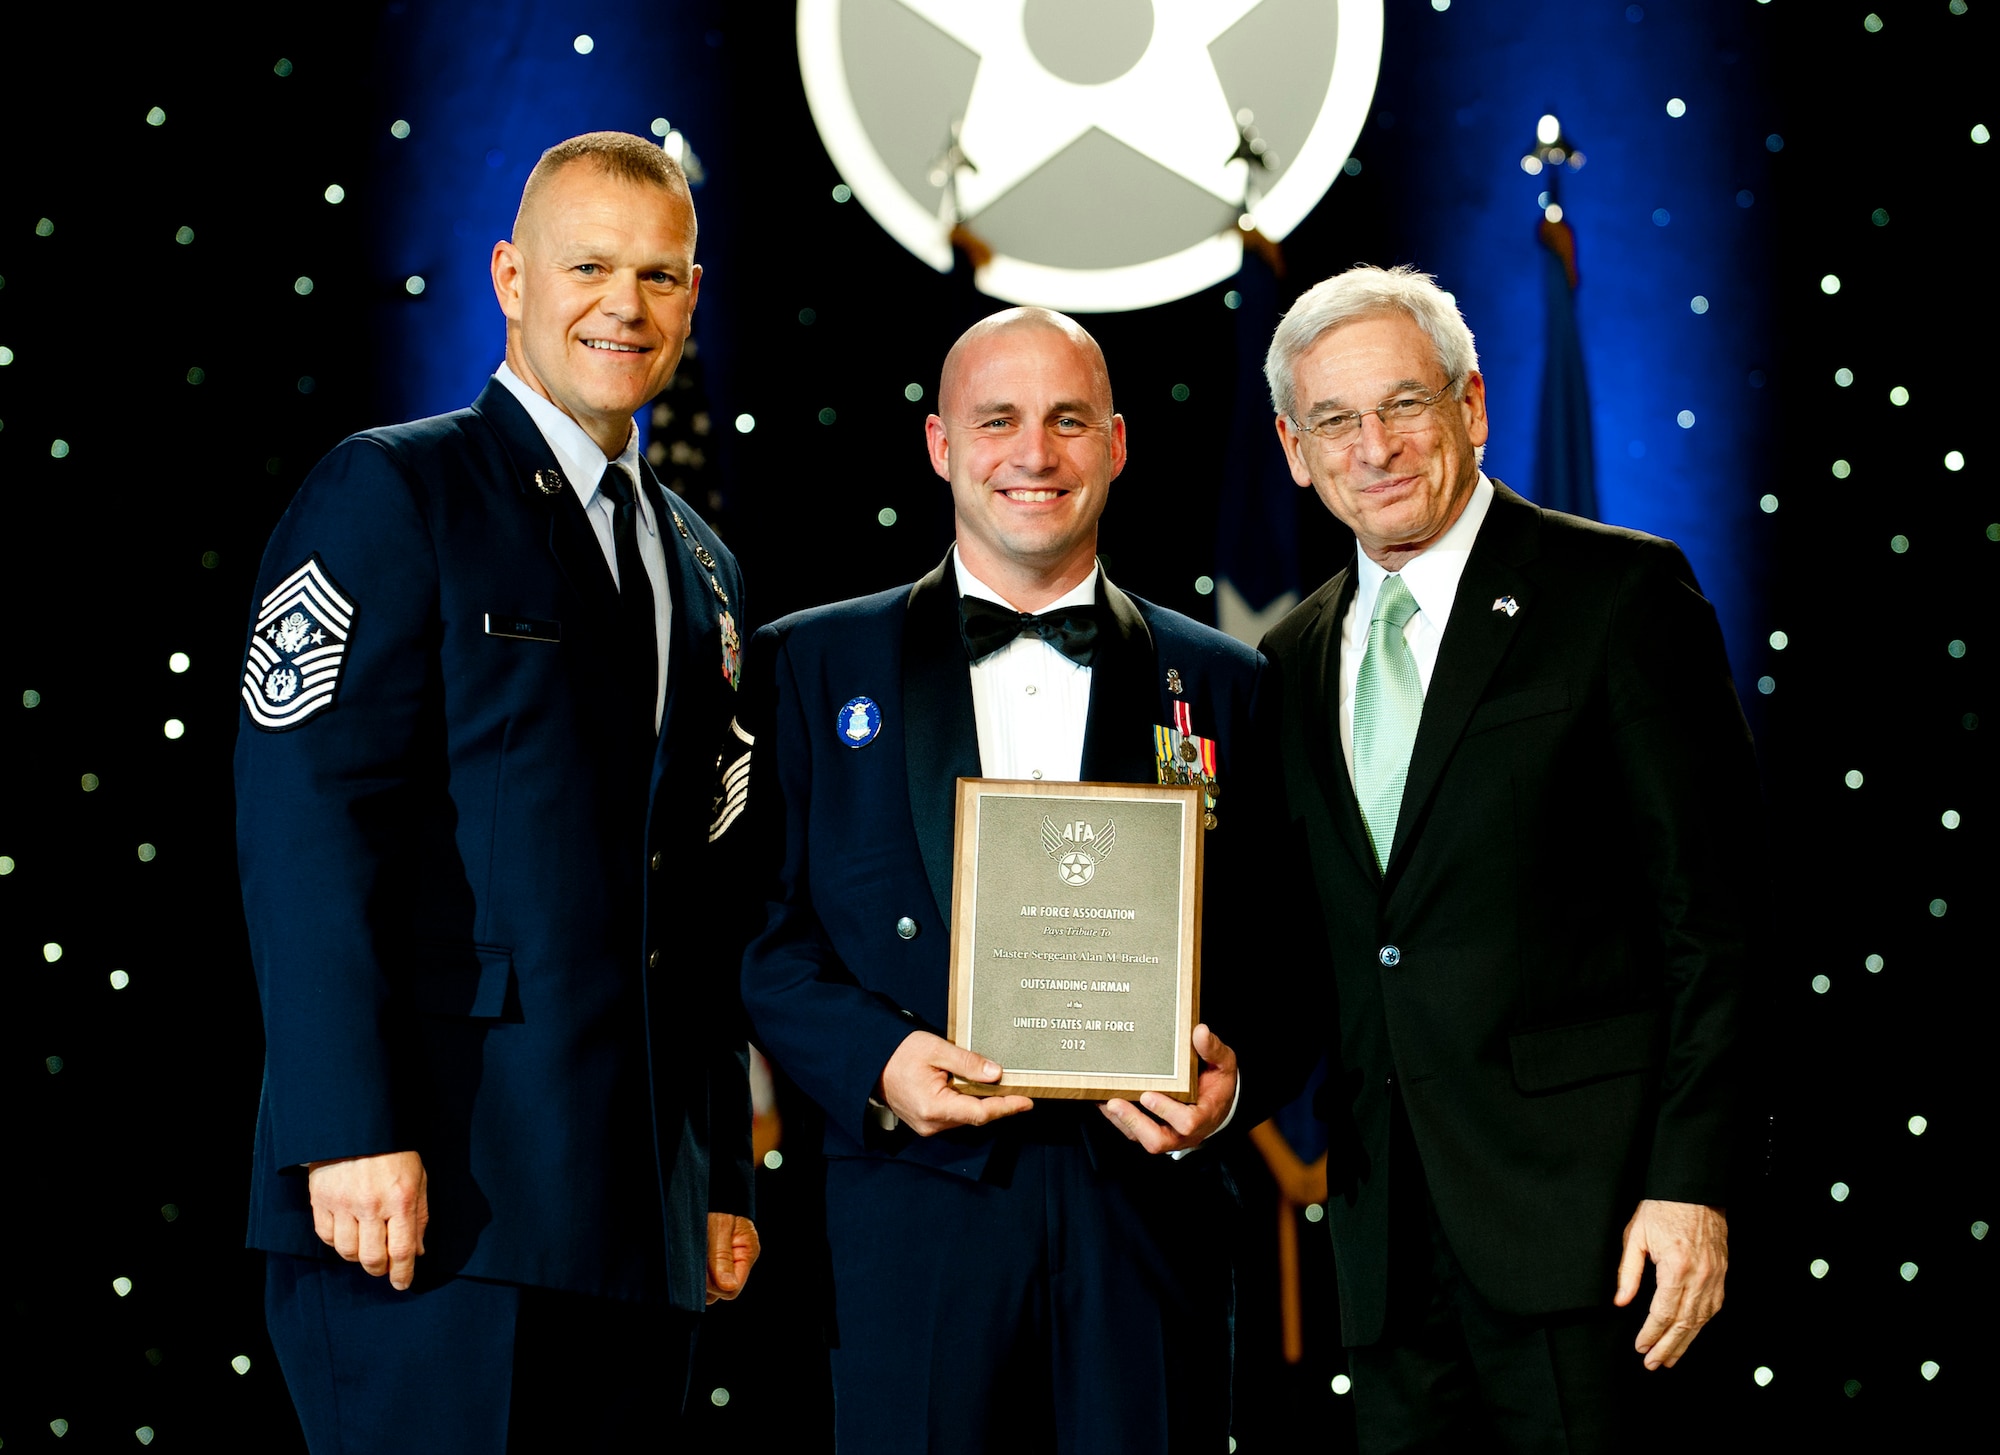 Chief Master Sgt. of the Air Force James Roy, left, and Sandy Schlitt, right, Air Force Association chairman of the board, present a plaque to Master Sgt. Alan Braden during the 12 Outstanding Airmen of the Year reception and awards dinner in Washington, D.C., Sept. 17, 2012. The recipients were recognized for superior leadership, job performance, community involvement and personal achievements. Braden is with the 88th Force Support Squadron from Wright-Patterson Air Force Base, Ohio. (U.S. Air Force photo/Jim Varhegyi)